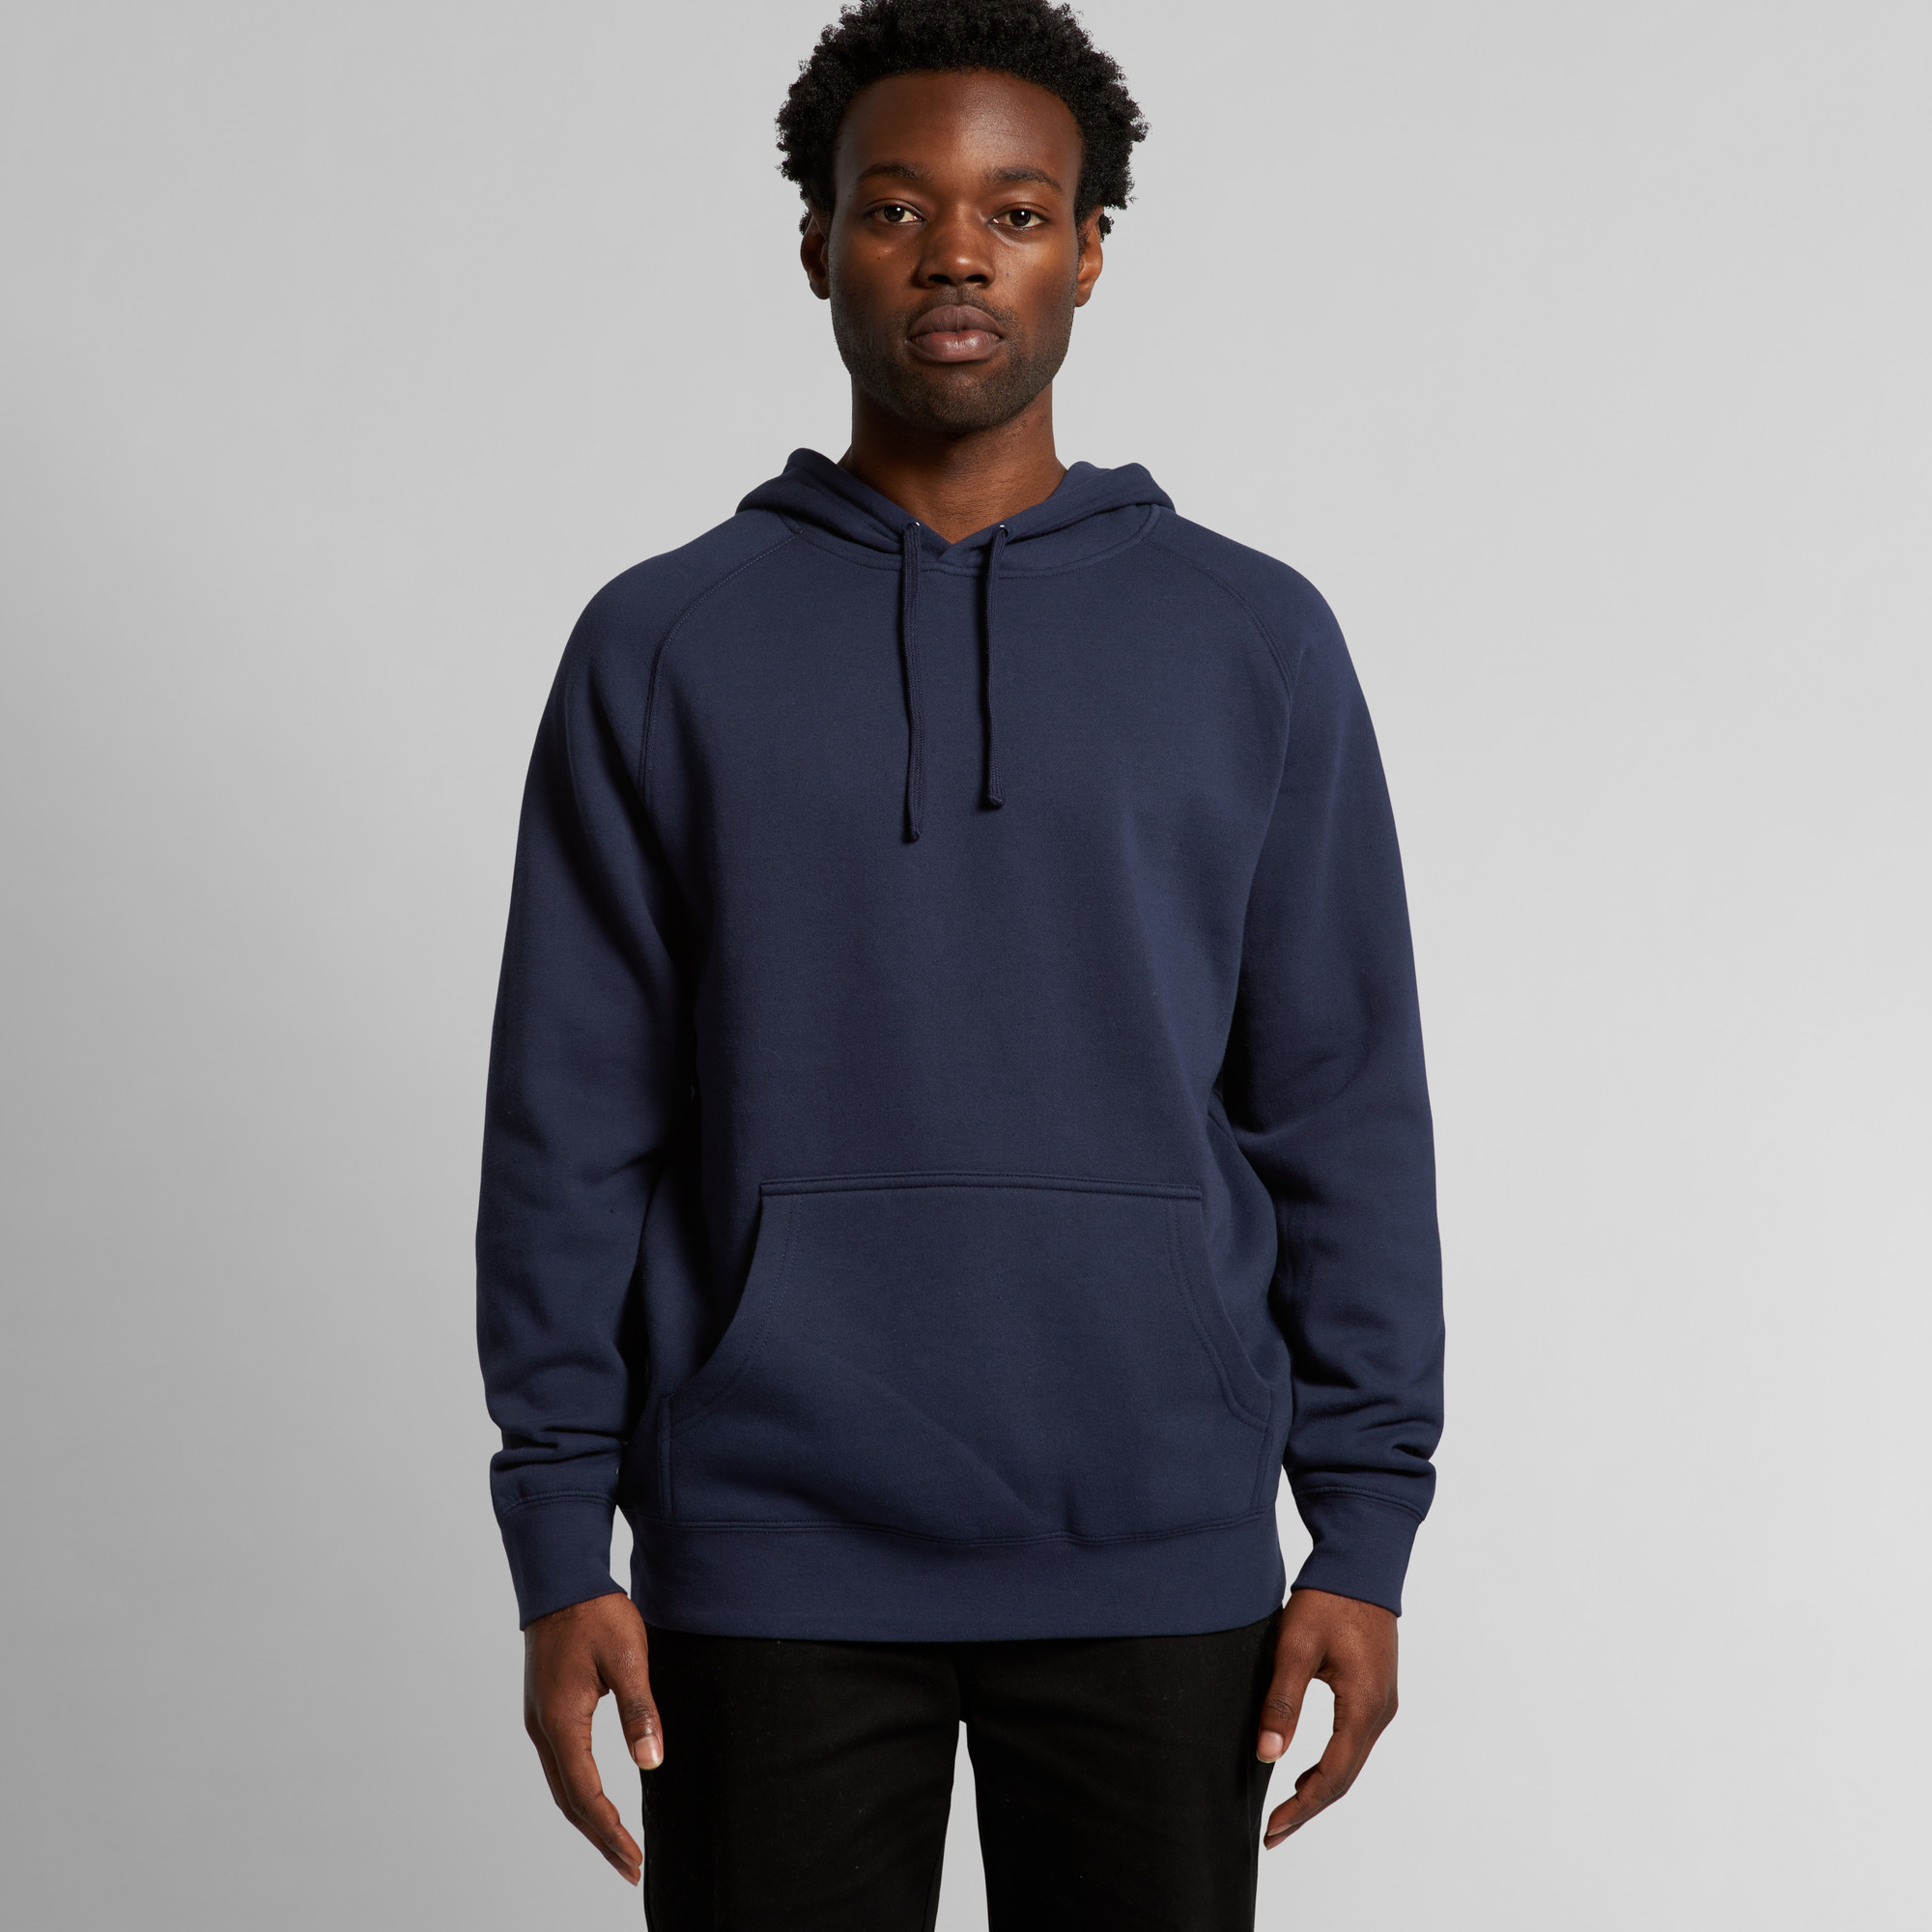 AS Colour | 5101 | Mens Supply Hoodie